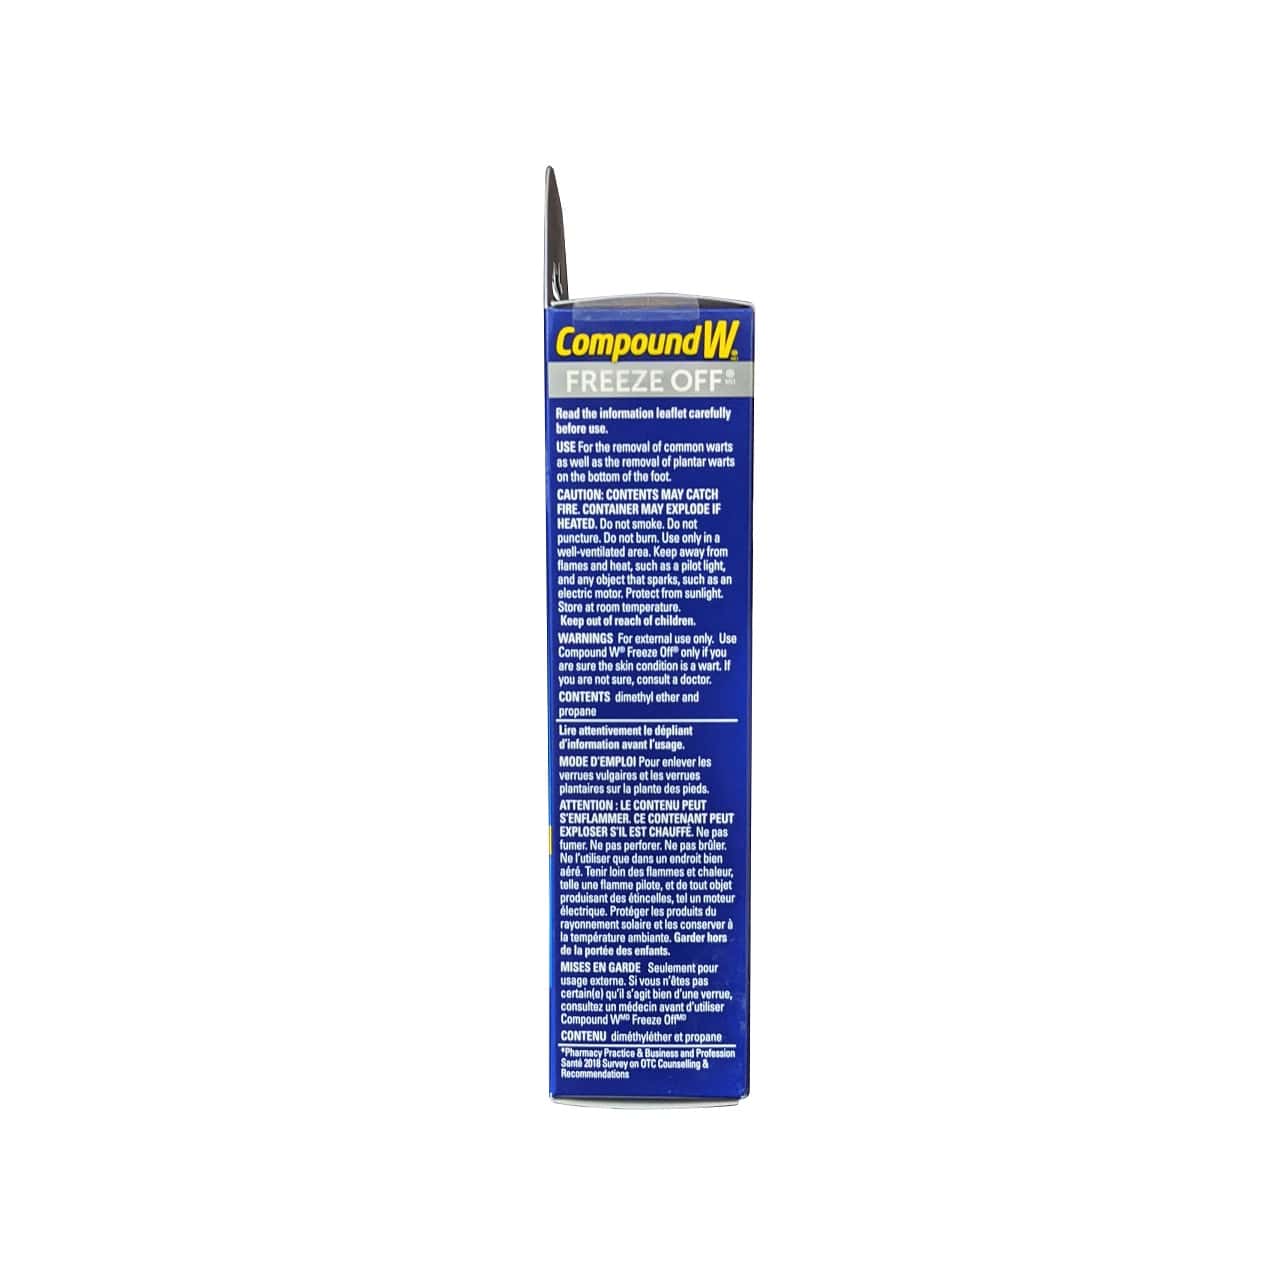 Use, Cautions, Warnings, Contents for Compound W Freeze Off Liquid (12 count)